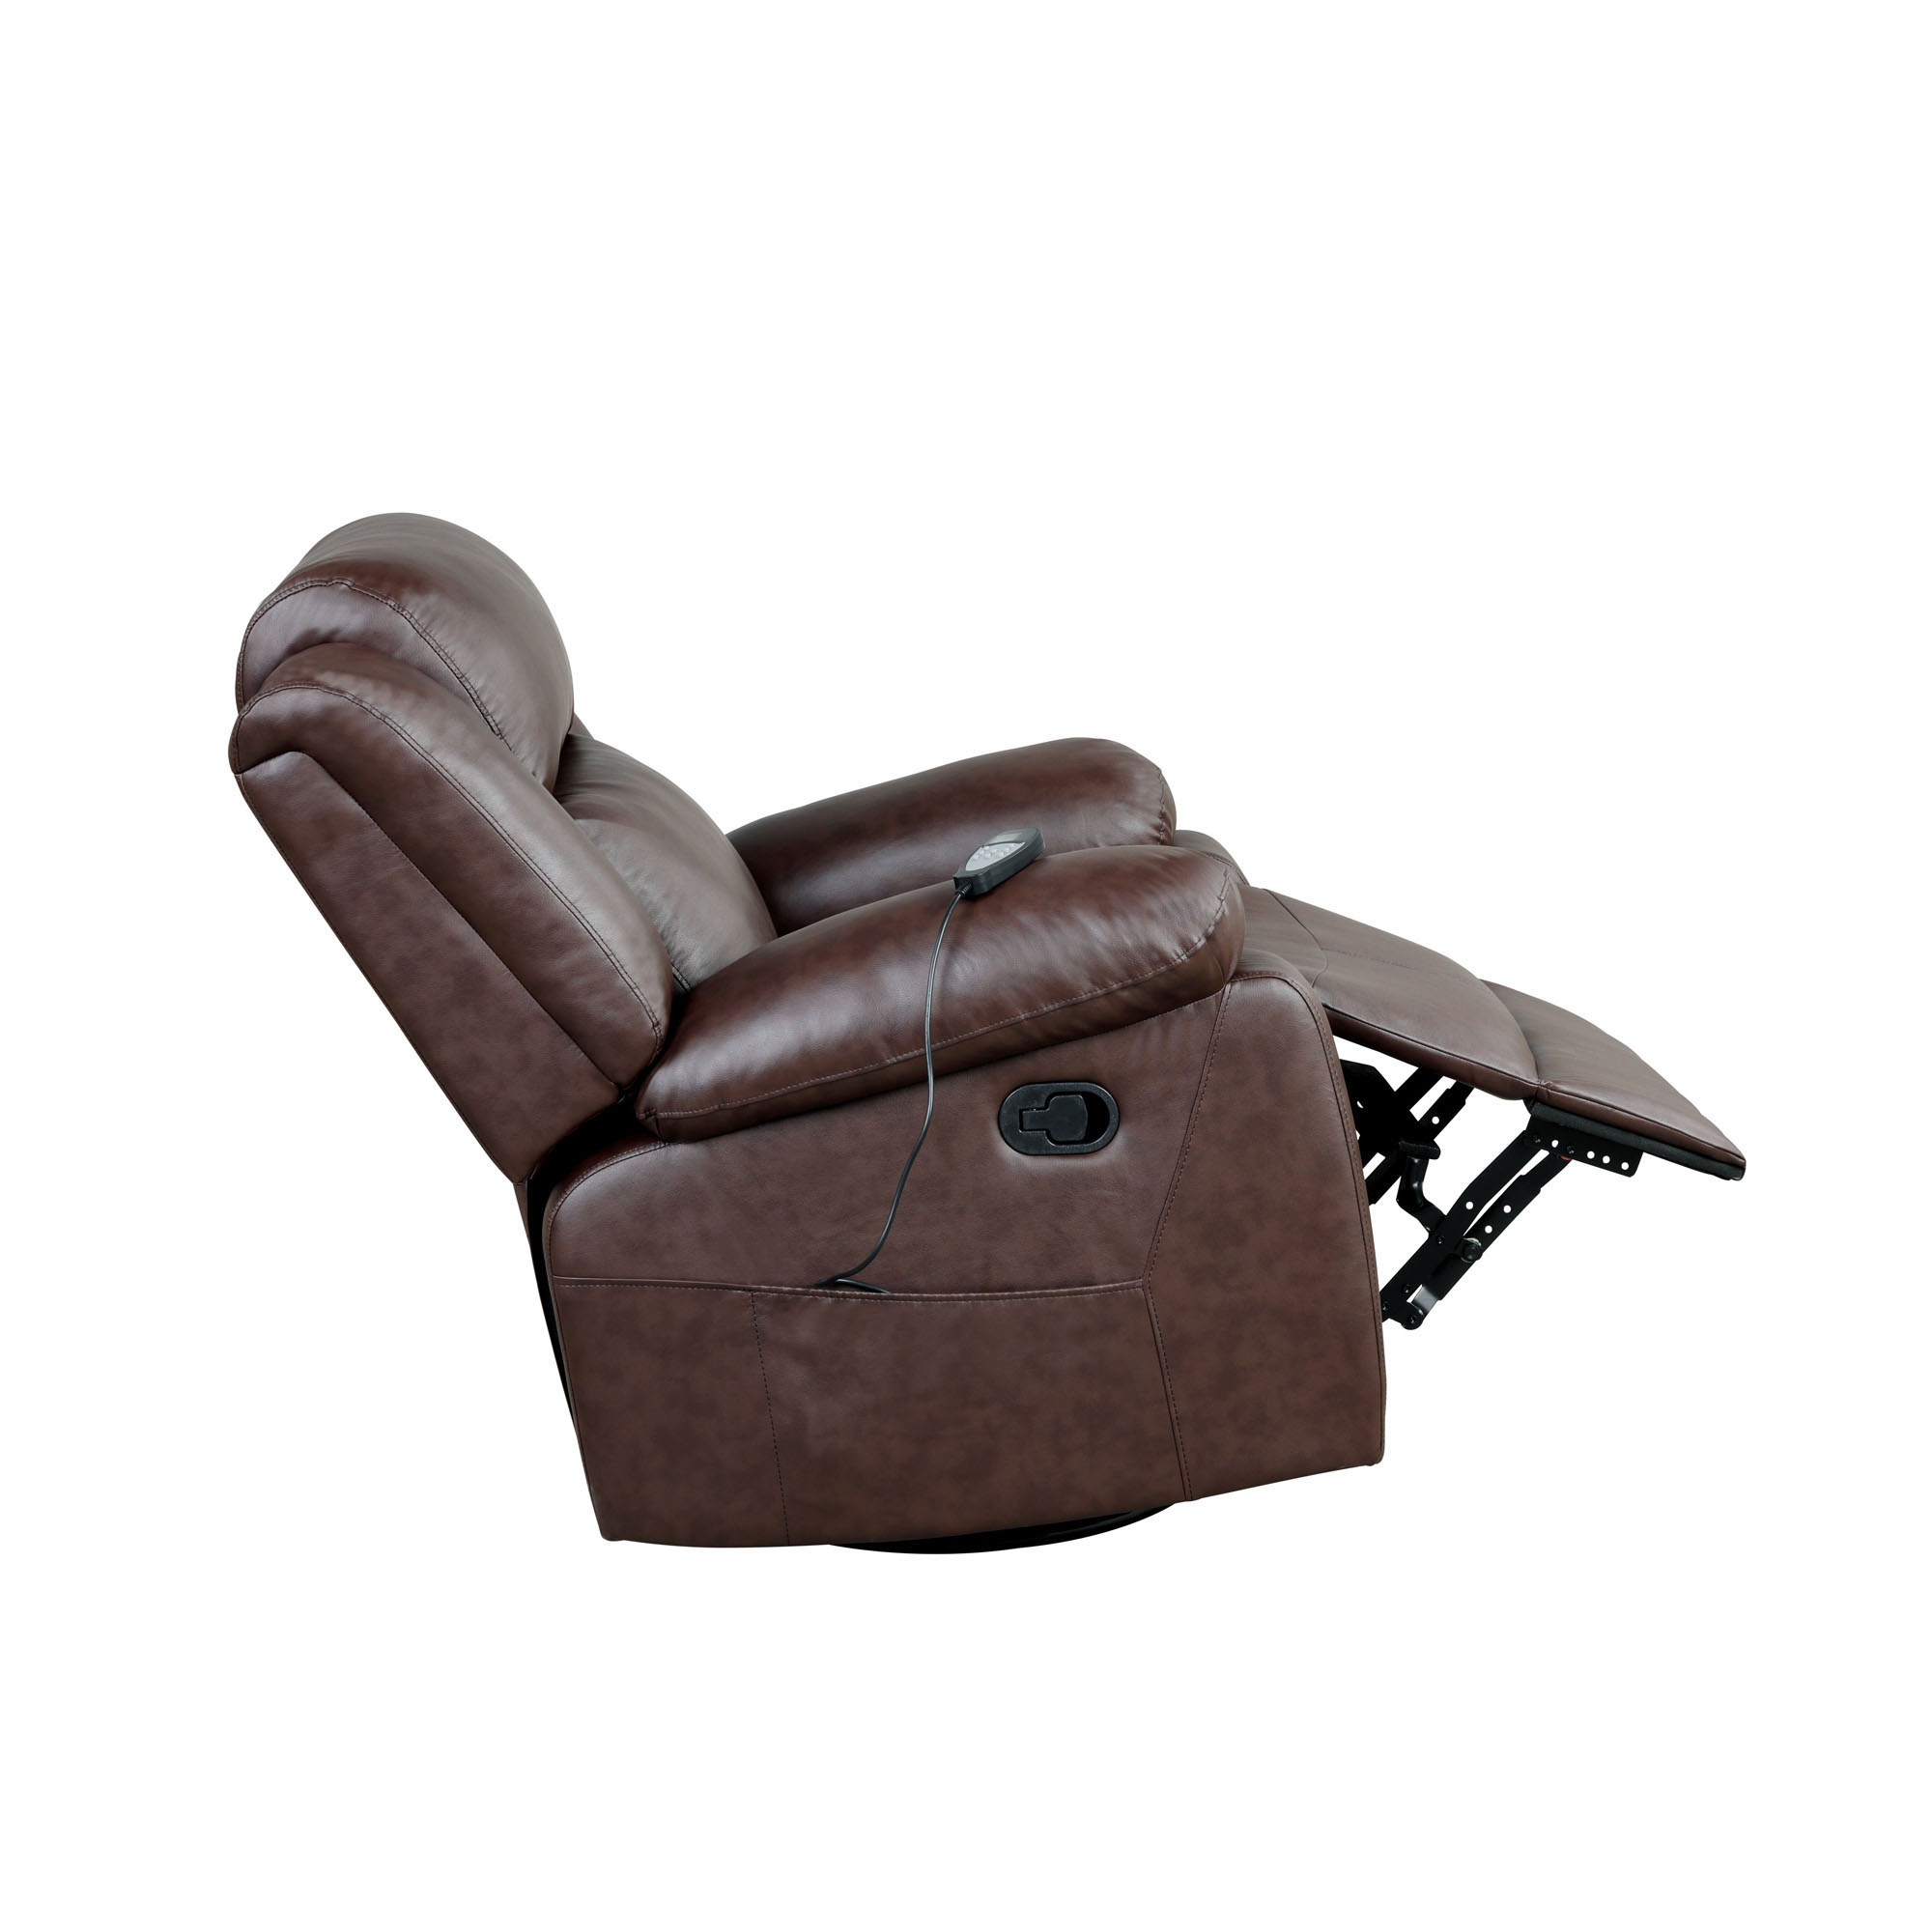 Elm & Oak Maxima Standard Manual Swivel Recliner with Massage and Heat, Brown Faux Leather - image 4 of 13